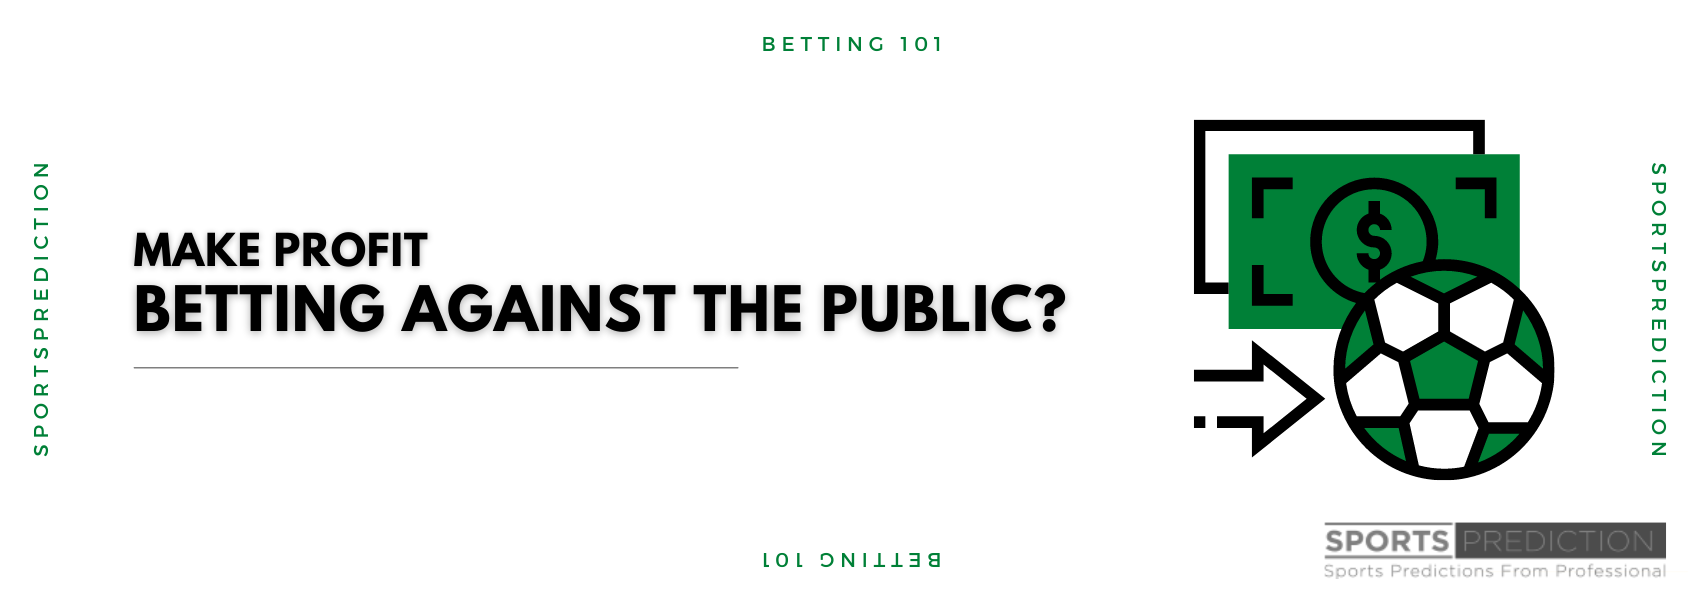 Can I Make a Profit By Betting Against The Public?